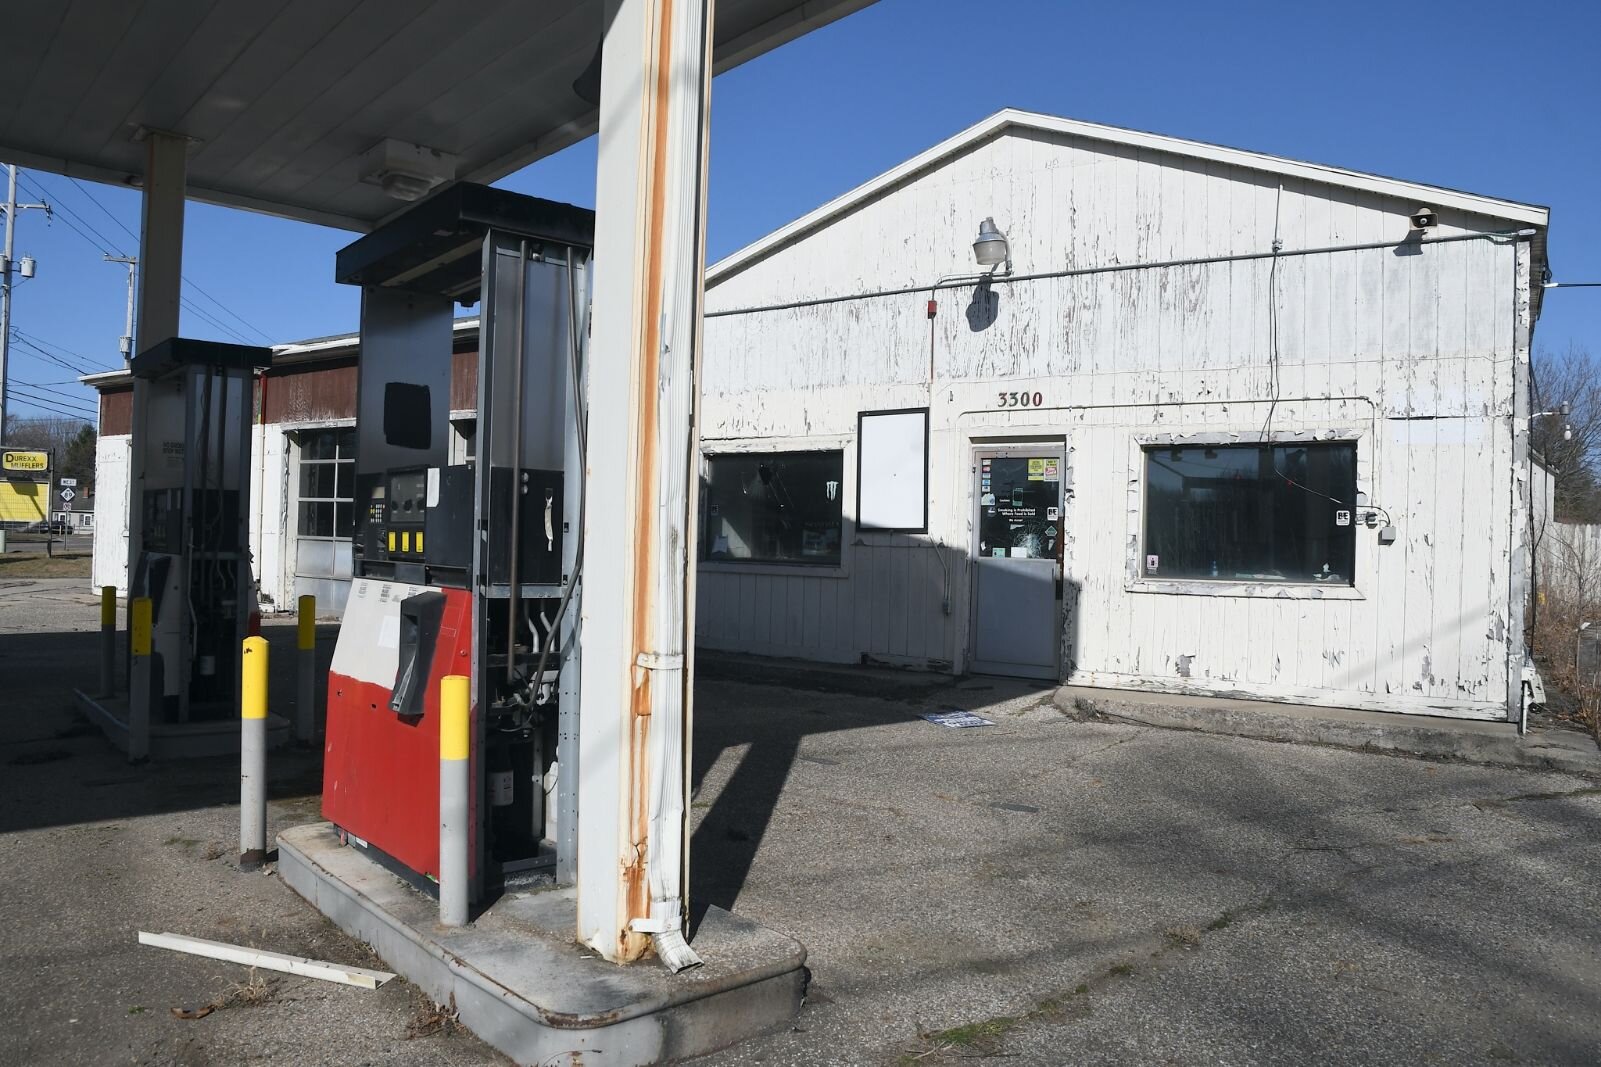 Gas station previously foreclosed in Urbandale at the intersection of West Michigan Avenue, Newburn, and Custer Drive.